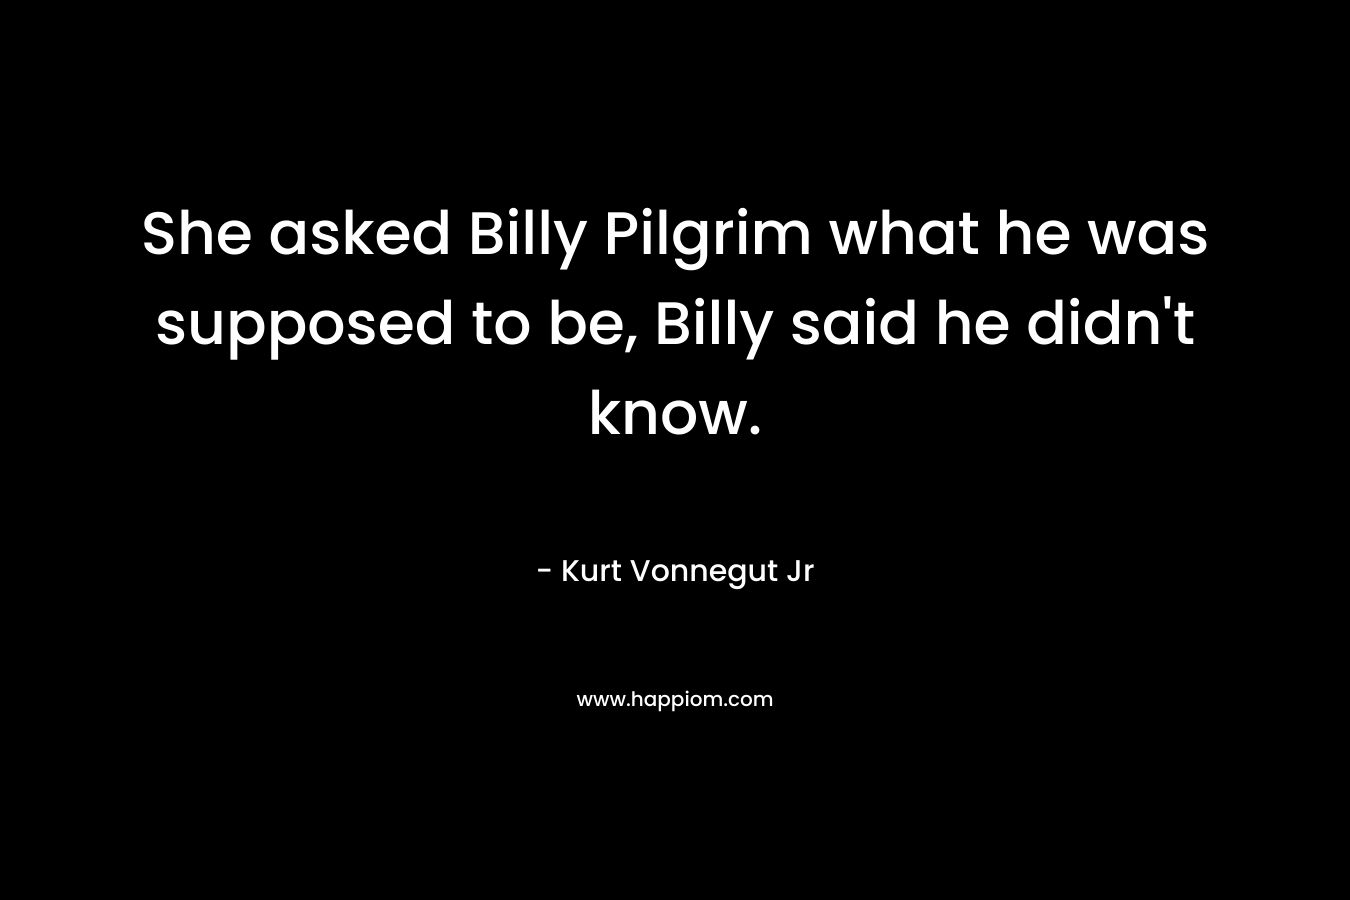 She asked Billy Pilgrim what he was supposed to be, Billy said he didn't know.